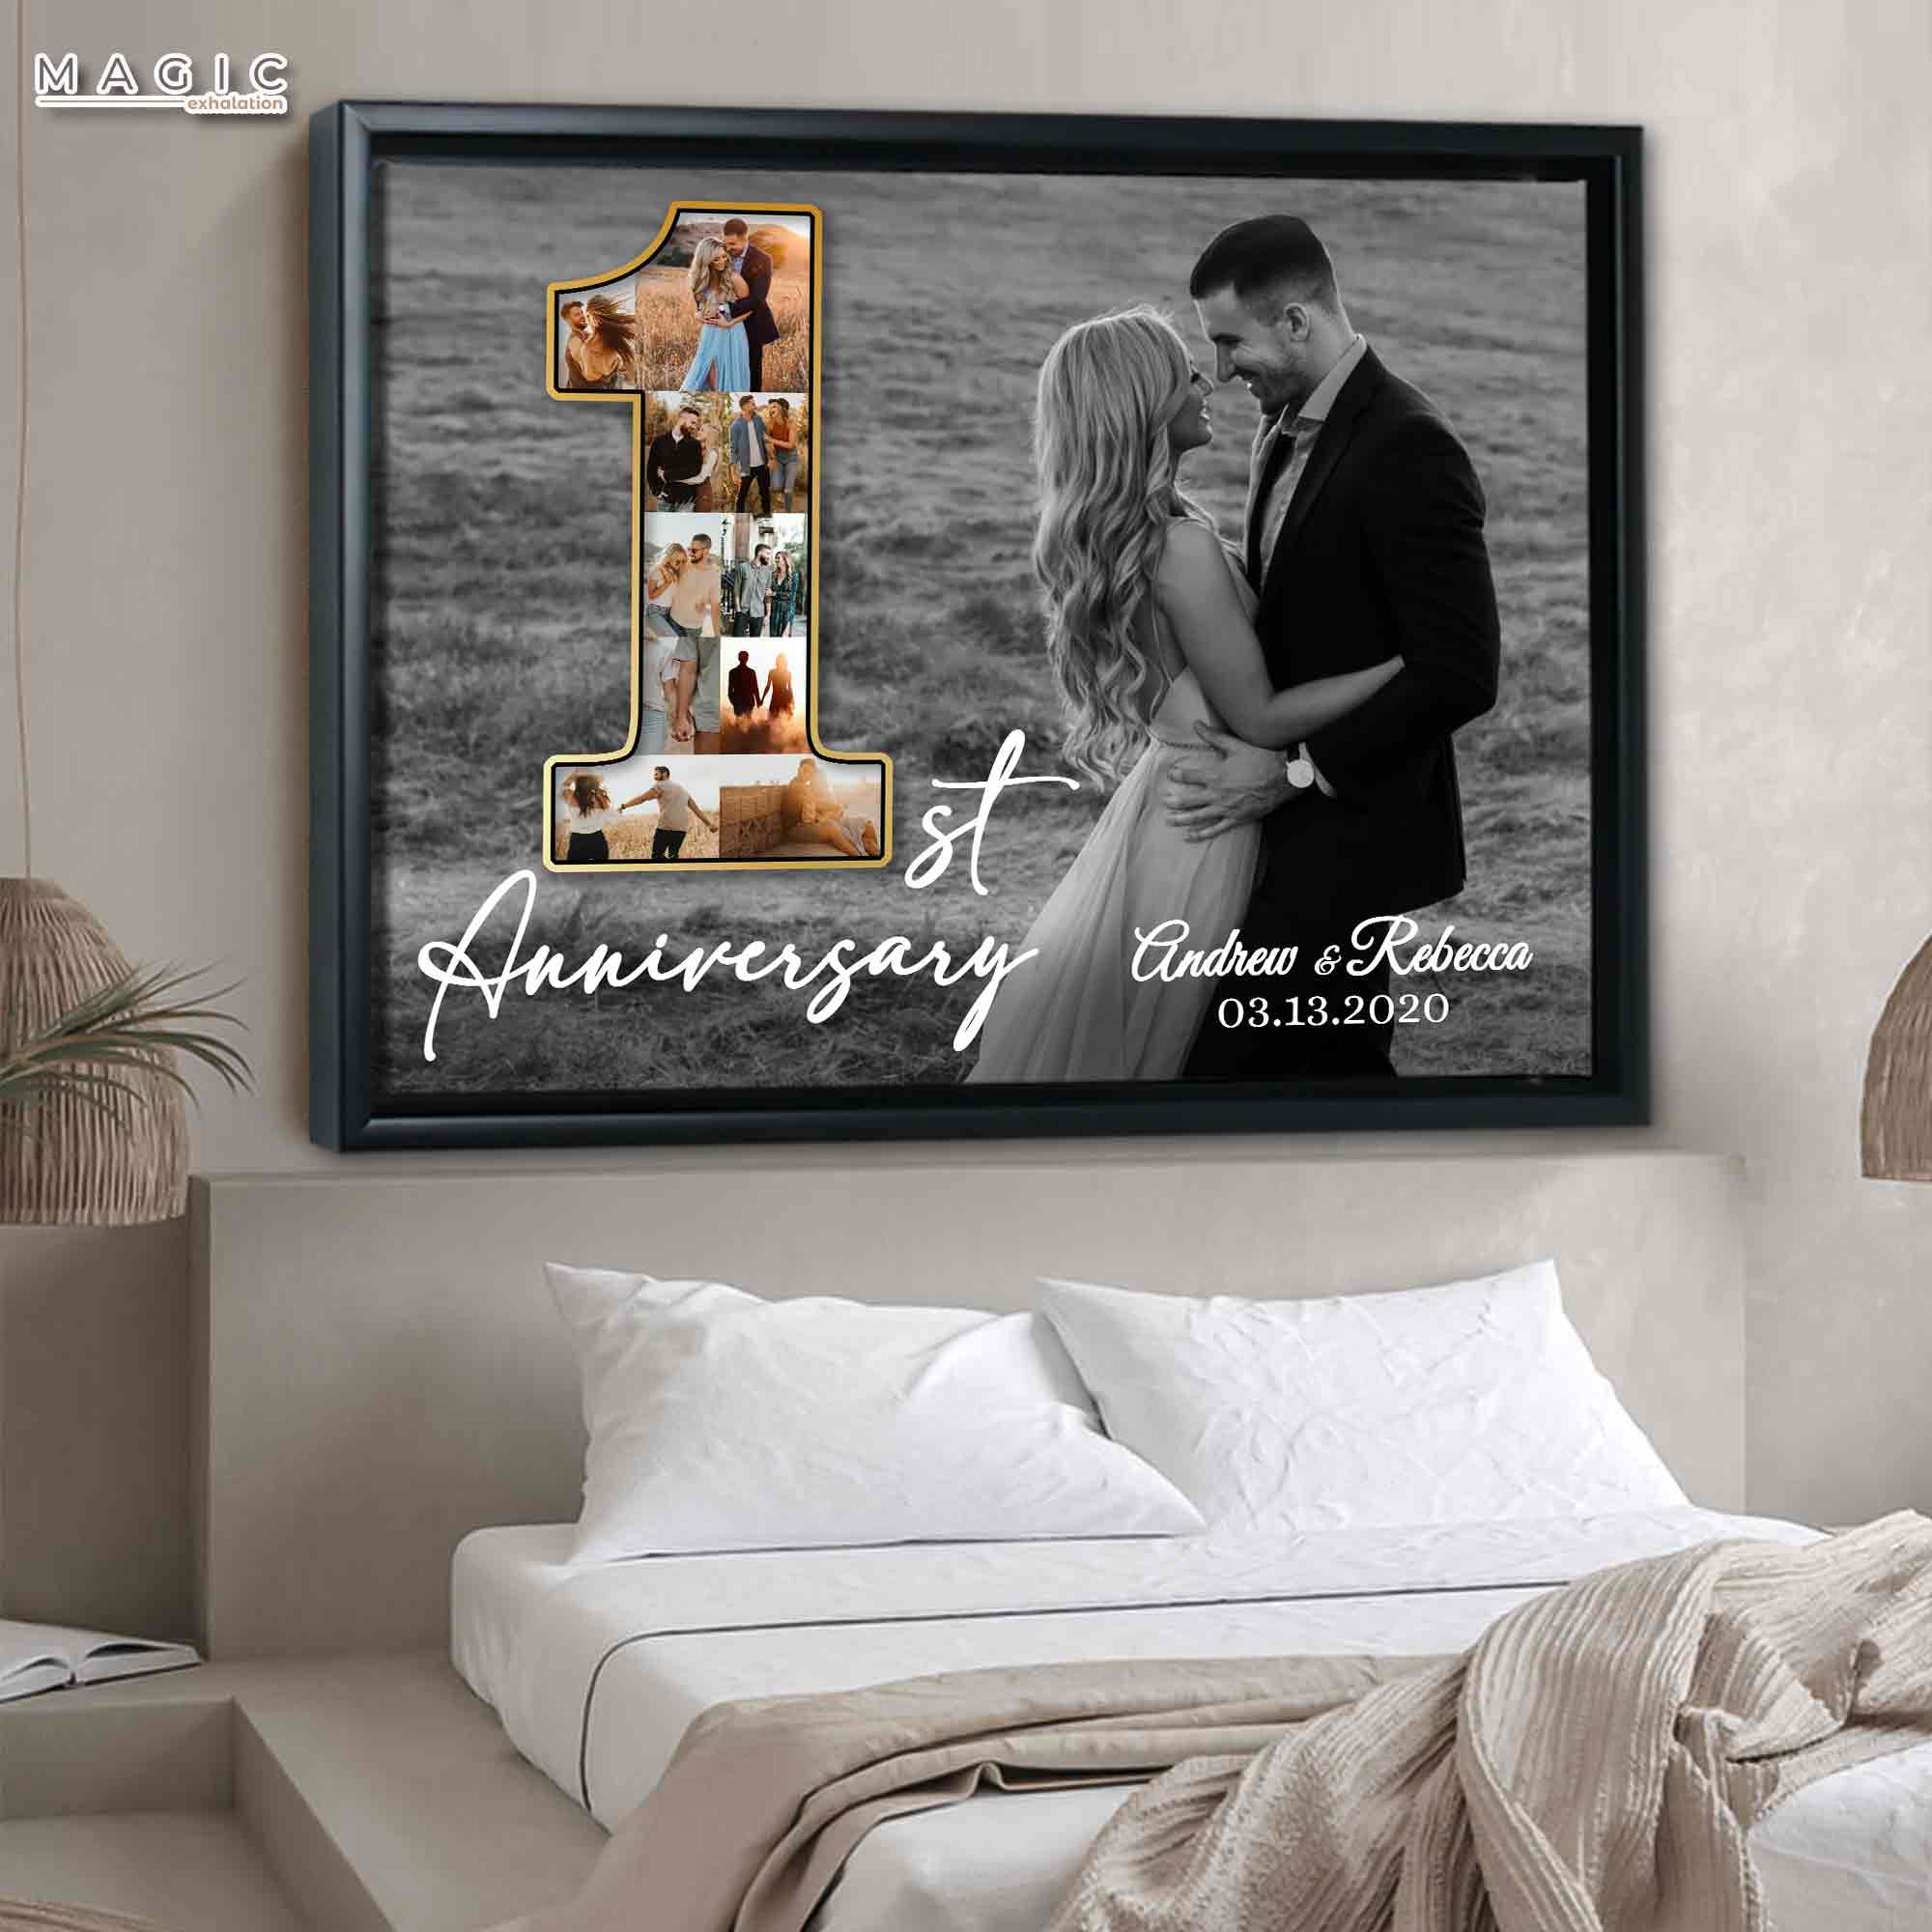 ideas for paper anniversary gifts, ideas for paper anniversary gifts for him,